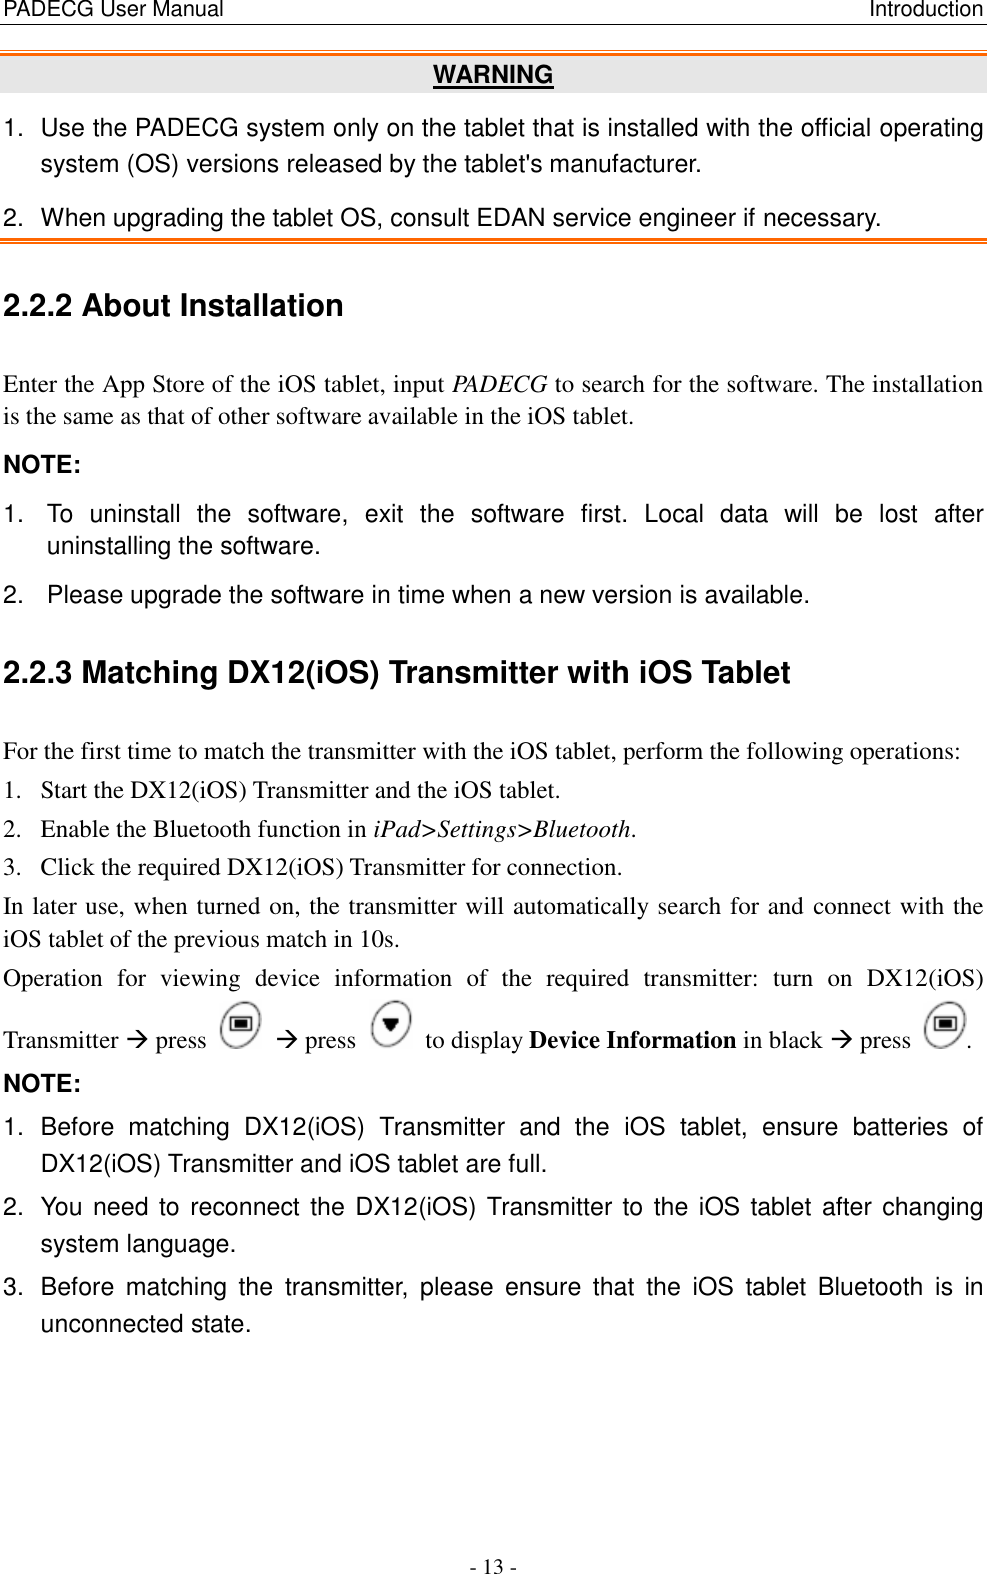 PADECG User Manual                                                                                                                      Introduction - 13 - WARNING 1.  Use the PADECG system only on the tablet that is installed with the official operating system (OS) versions released by the tablet&apos;s manufacturer. 2.  When upgrading the tablet OS, consult EDAN service engineer if necessary. 2.2.2 About Installation Enter the App Store of the iOS tablet, input PADECG to search for the software. The installation is the same as that of other software available in the iOS tablet. NOTE:   1.  To  uninstall  the  software,  exit  the  software  first.  Local  data  will  be  lost  after uninstalling the software. 2.  Please upgrade the software in time when a new version is available. 2.2.3 Matching DX12(iOS) Transmitter with iOS Tablet   For the first time to match the transmitter with the iOS tablet, perform the following operations: 1. Start the DX12(iOS) Transmitter and the iOS tablet. 2. Enable the Bluetooth function in iPad&gt;Settings&gt;Bluetooth. 3. Click the required DX12(iOS) Transmitter for connection. In later use, when turned on, the transmitter will automatically search for and connect with the iOS tablet of the previous match in 10s. Operation  for  viewing  device  information  of  the  required  transmitter:  turn  on  DX12(iOS) Transmitter  press     press    to display Device Information in black  press  . NOTE:   1.  Before  matching  DX12(iOS)  Transmitter  and  the  iOS  tablet,  ensure  batteries  of DX12(iOS) Transmitter and iOS tablet are full. 2.  You  need to reconnect the DX12(iOS) Transmitter to the iOS tablet after changing system language. 3.  Before  matching  the  transmitter,  please  ensure  that  the  iOS  tablet  Bluetooth  is  in unconnected state. 